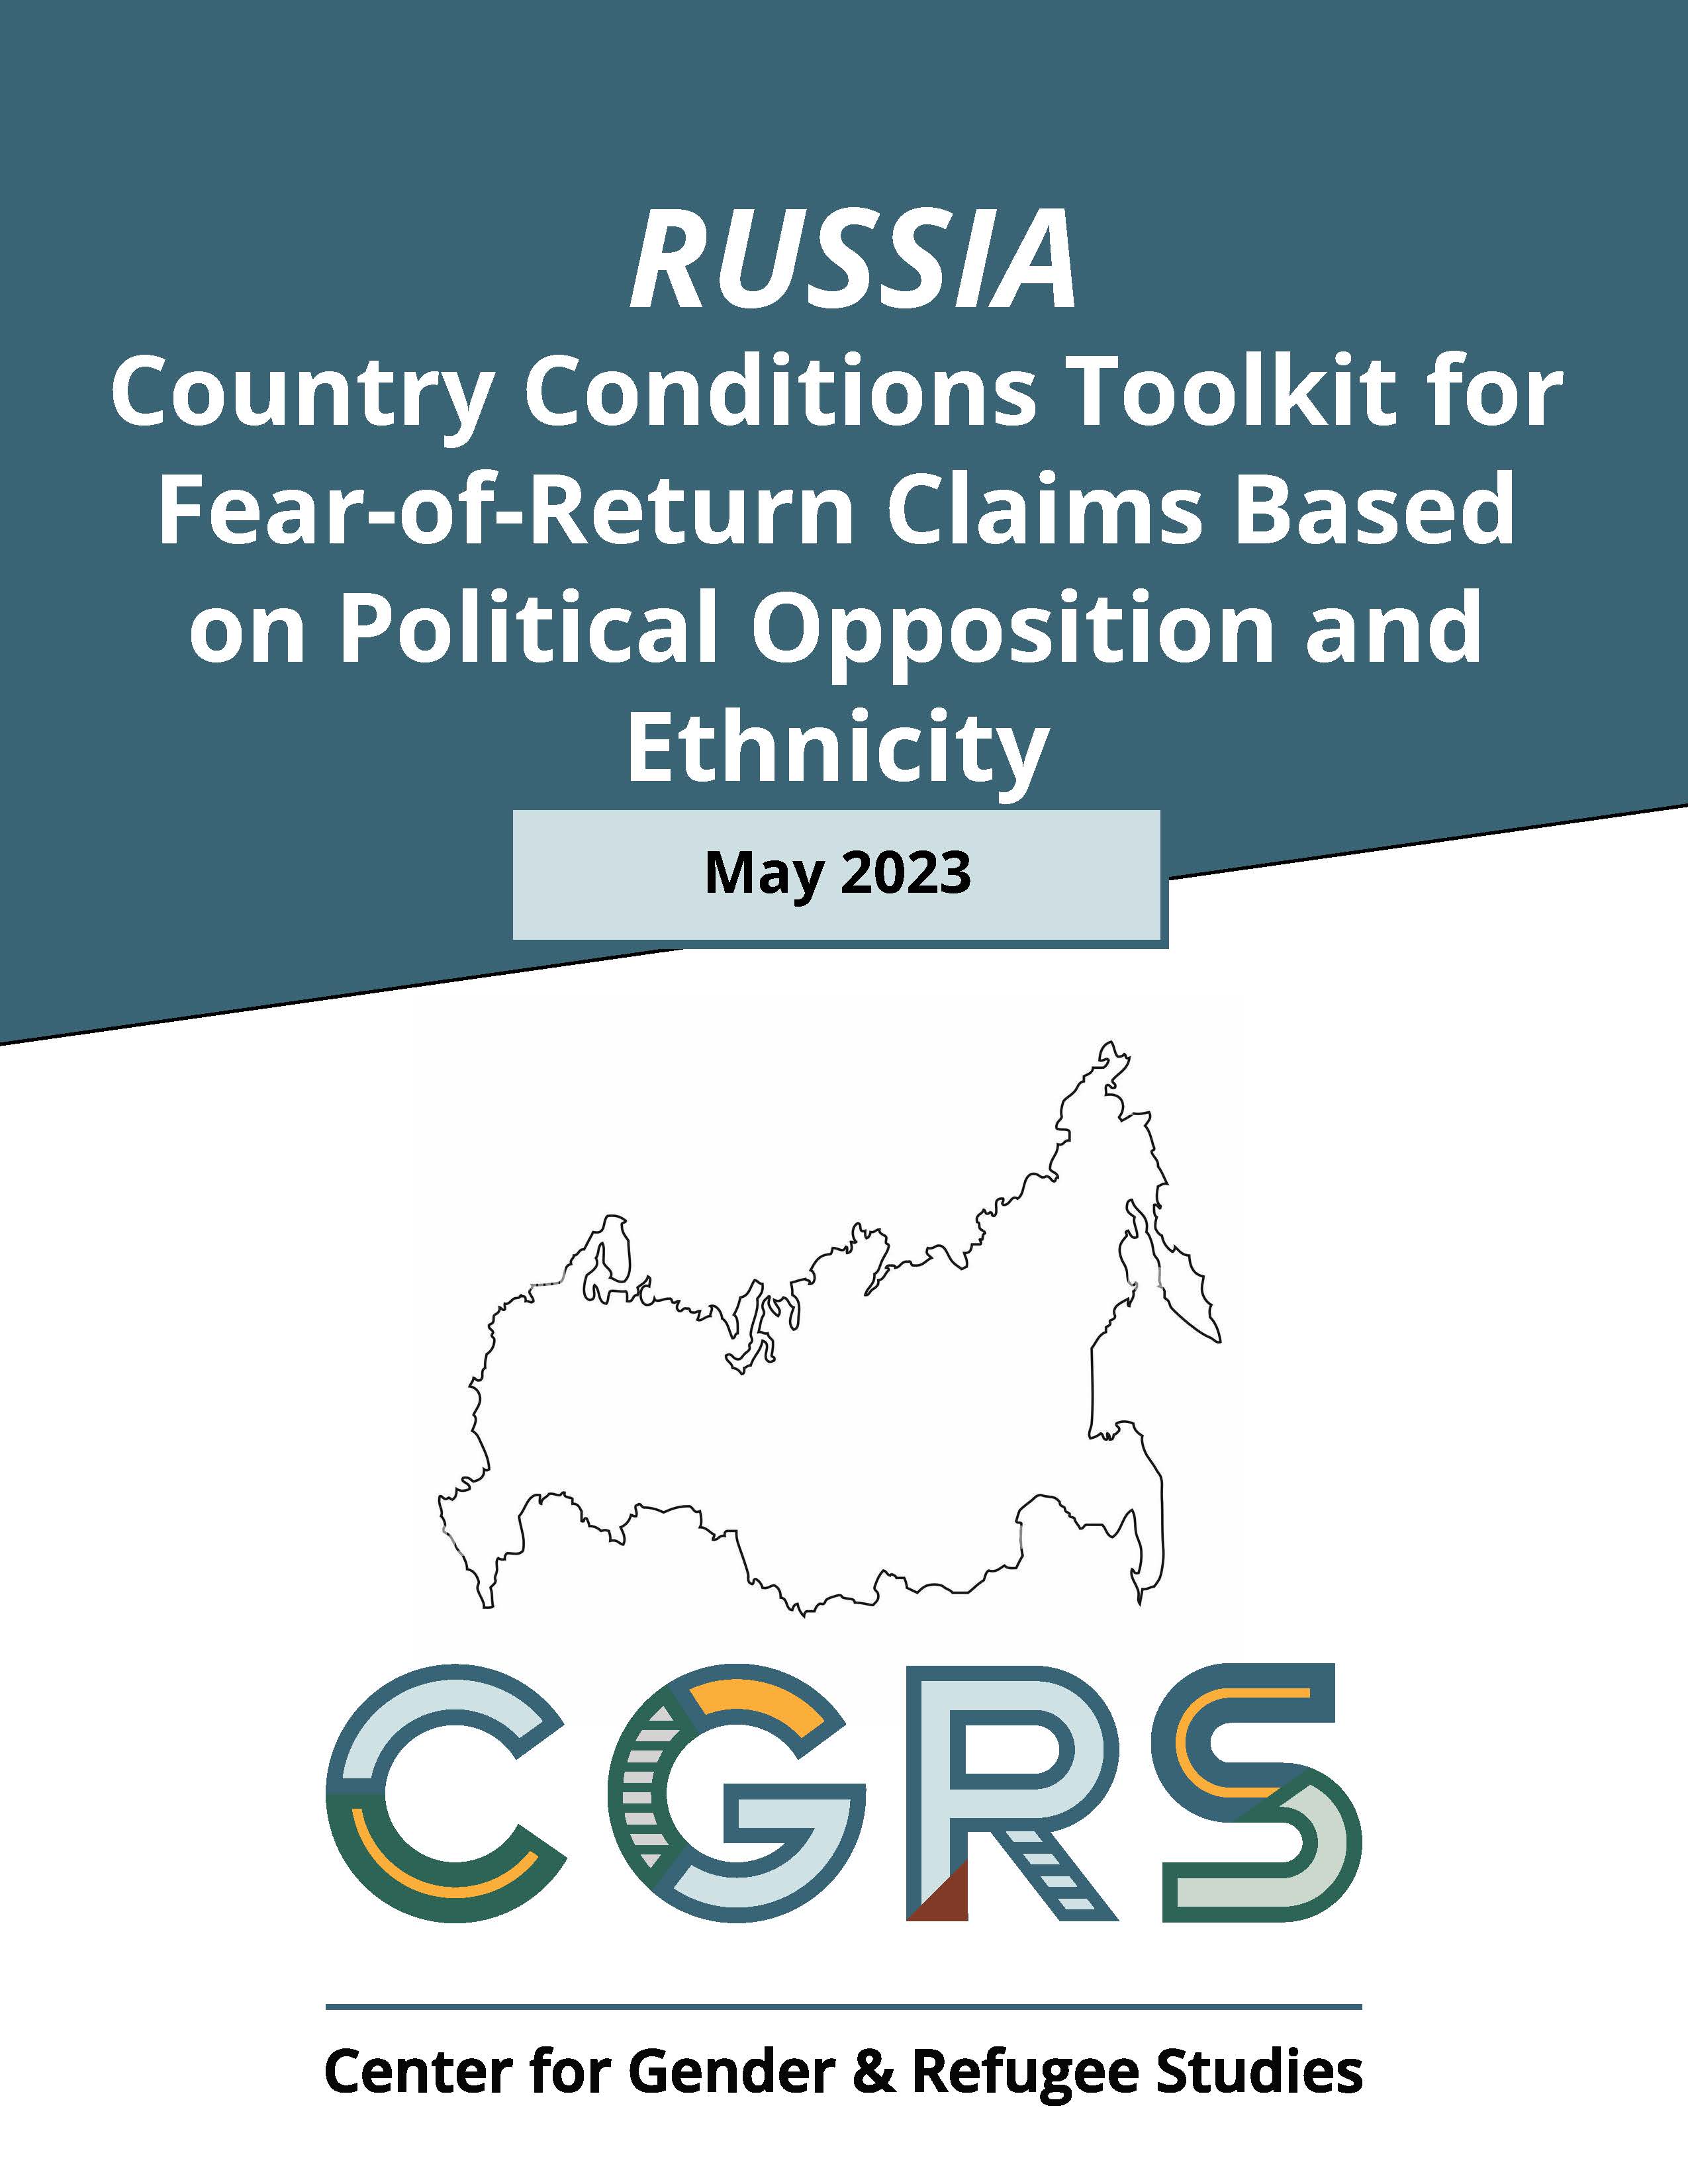 new CGRS russia country conditions toolkit on ethnicity and political opinion